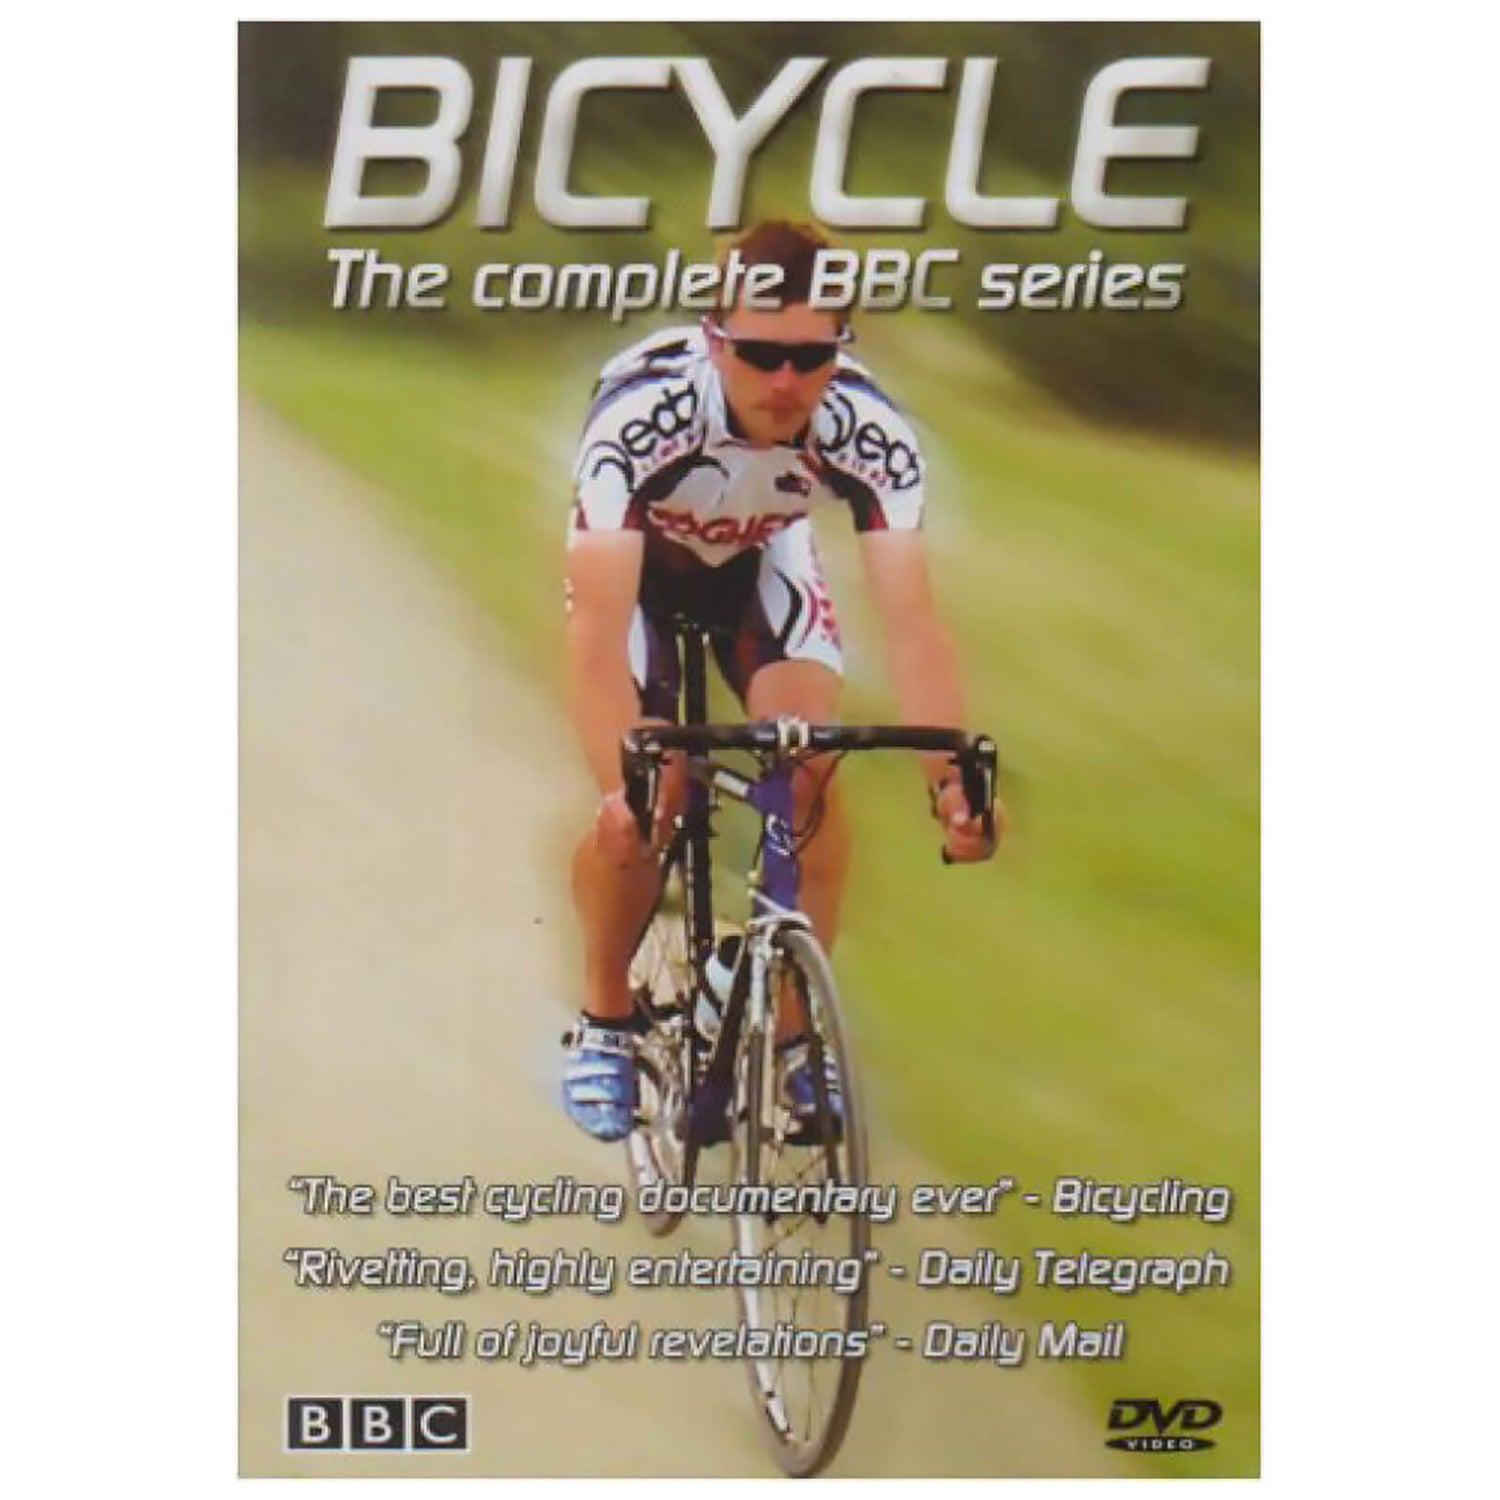 Bicycle - The Complete BBC Series